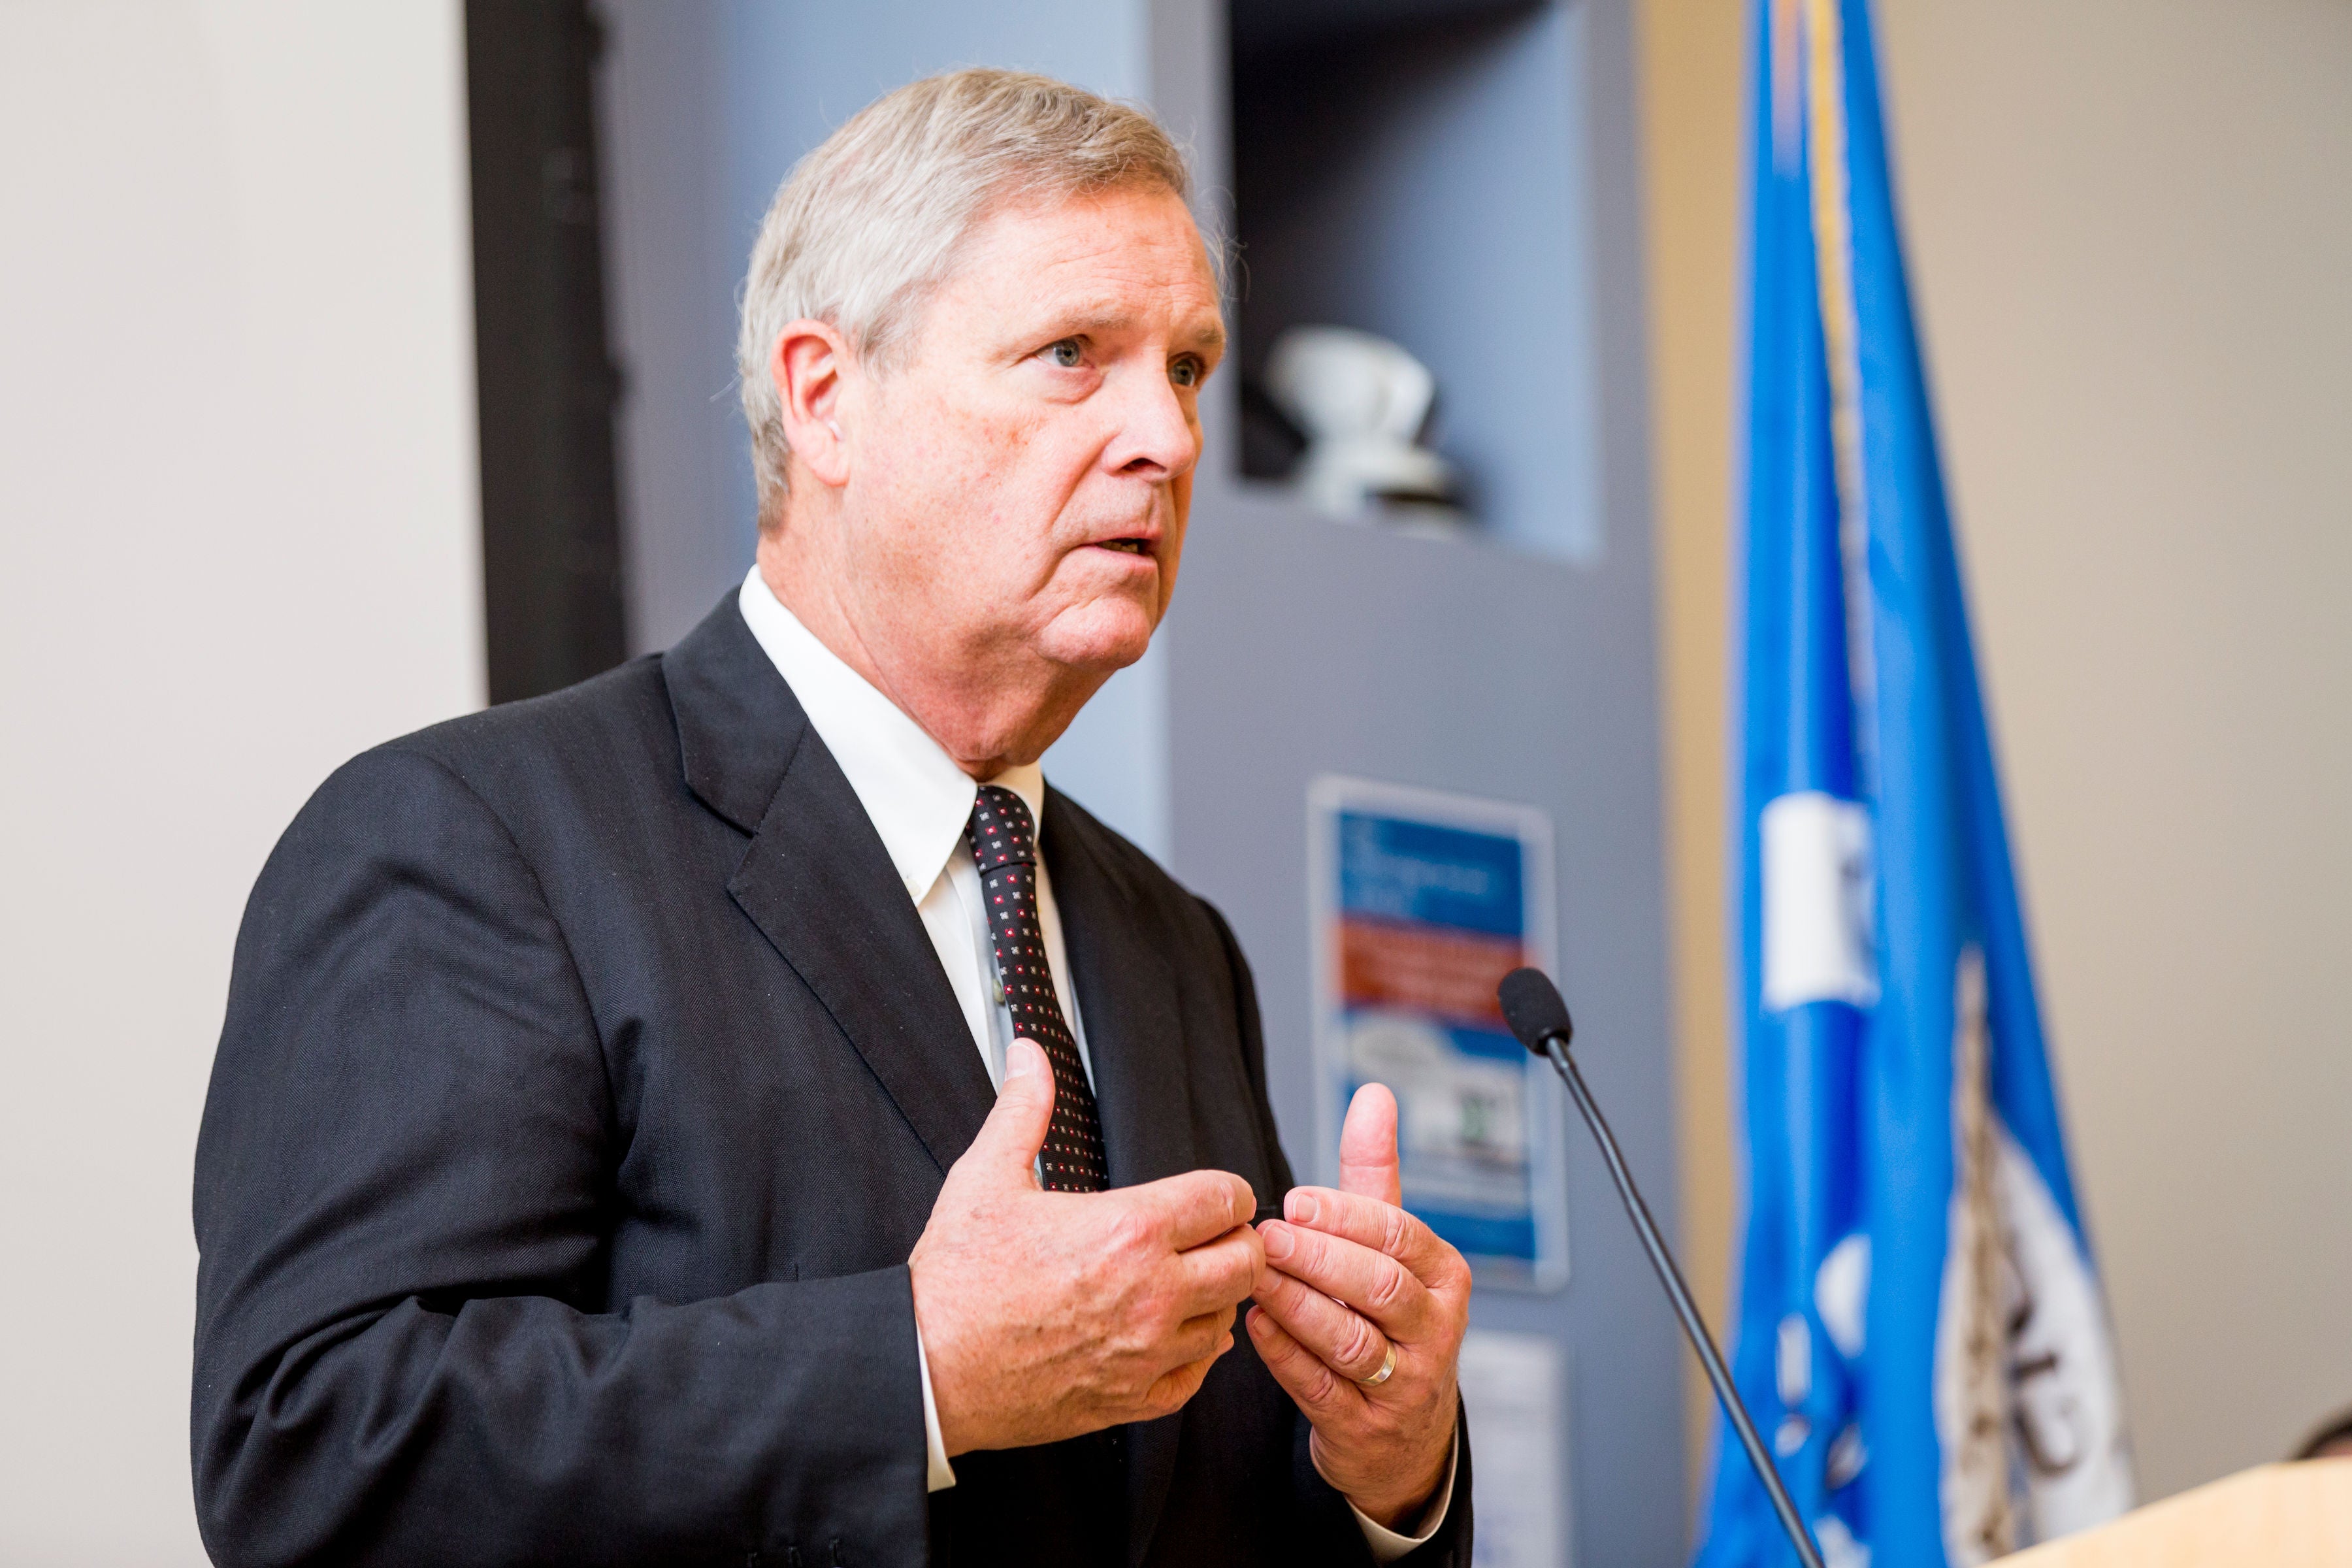 Tom Vilsack gives remarks during the Jean Mayer Prize event